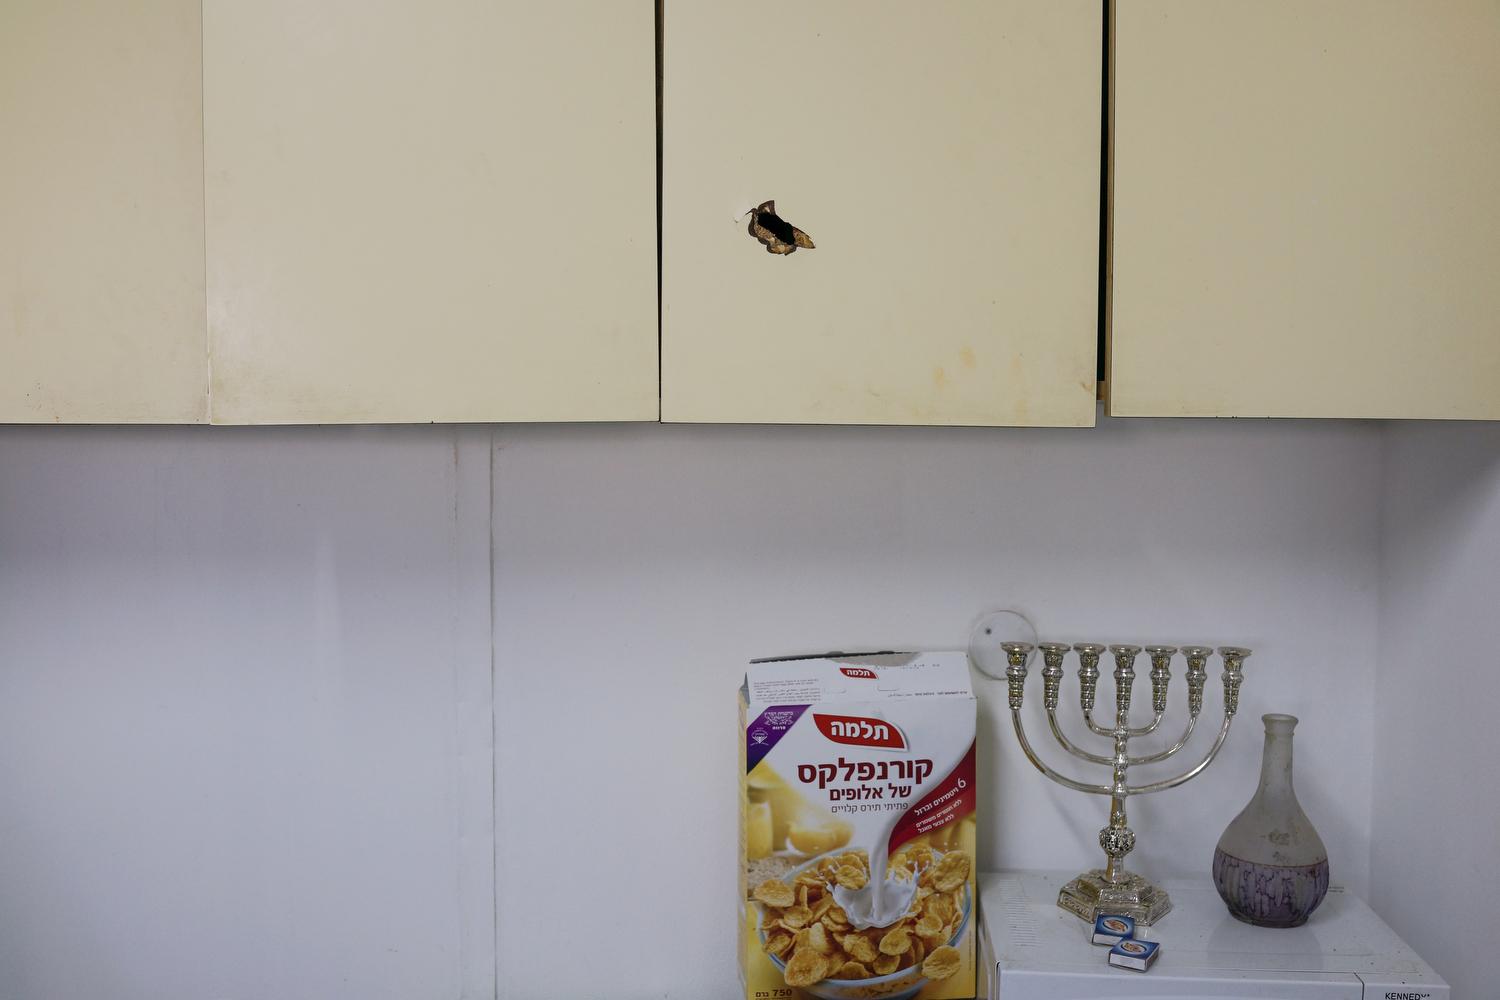 2013.  Hebron.  Palestinian Territories/The West Bank.  A bullet hole from the Second Intifada in the house of an Israeli settler in the middle of Hebron.  